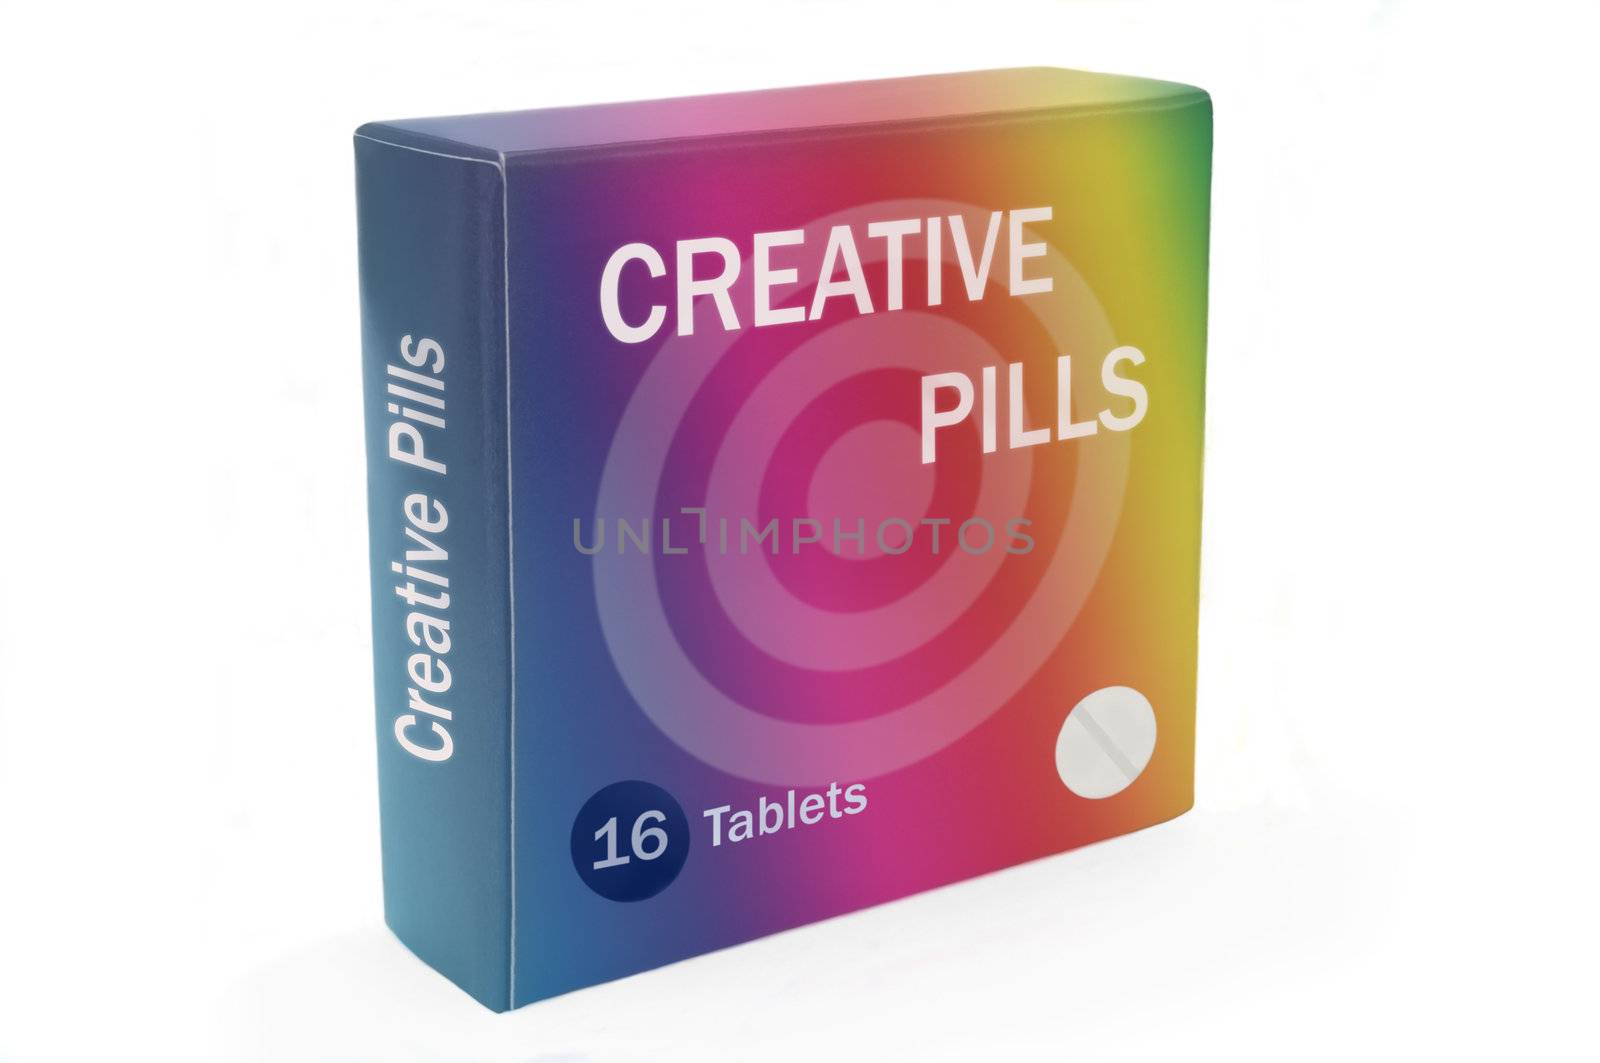 Close and low level angle capturing a multicoloured medication pack with the words "Creative Pills" arranged over white.